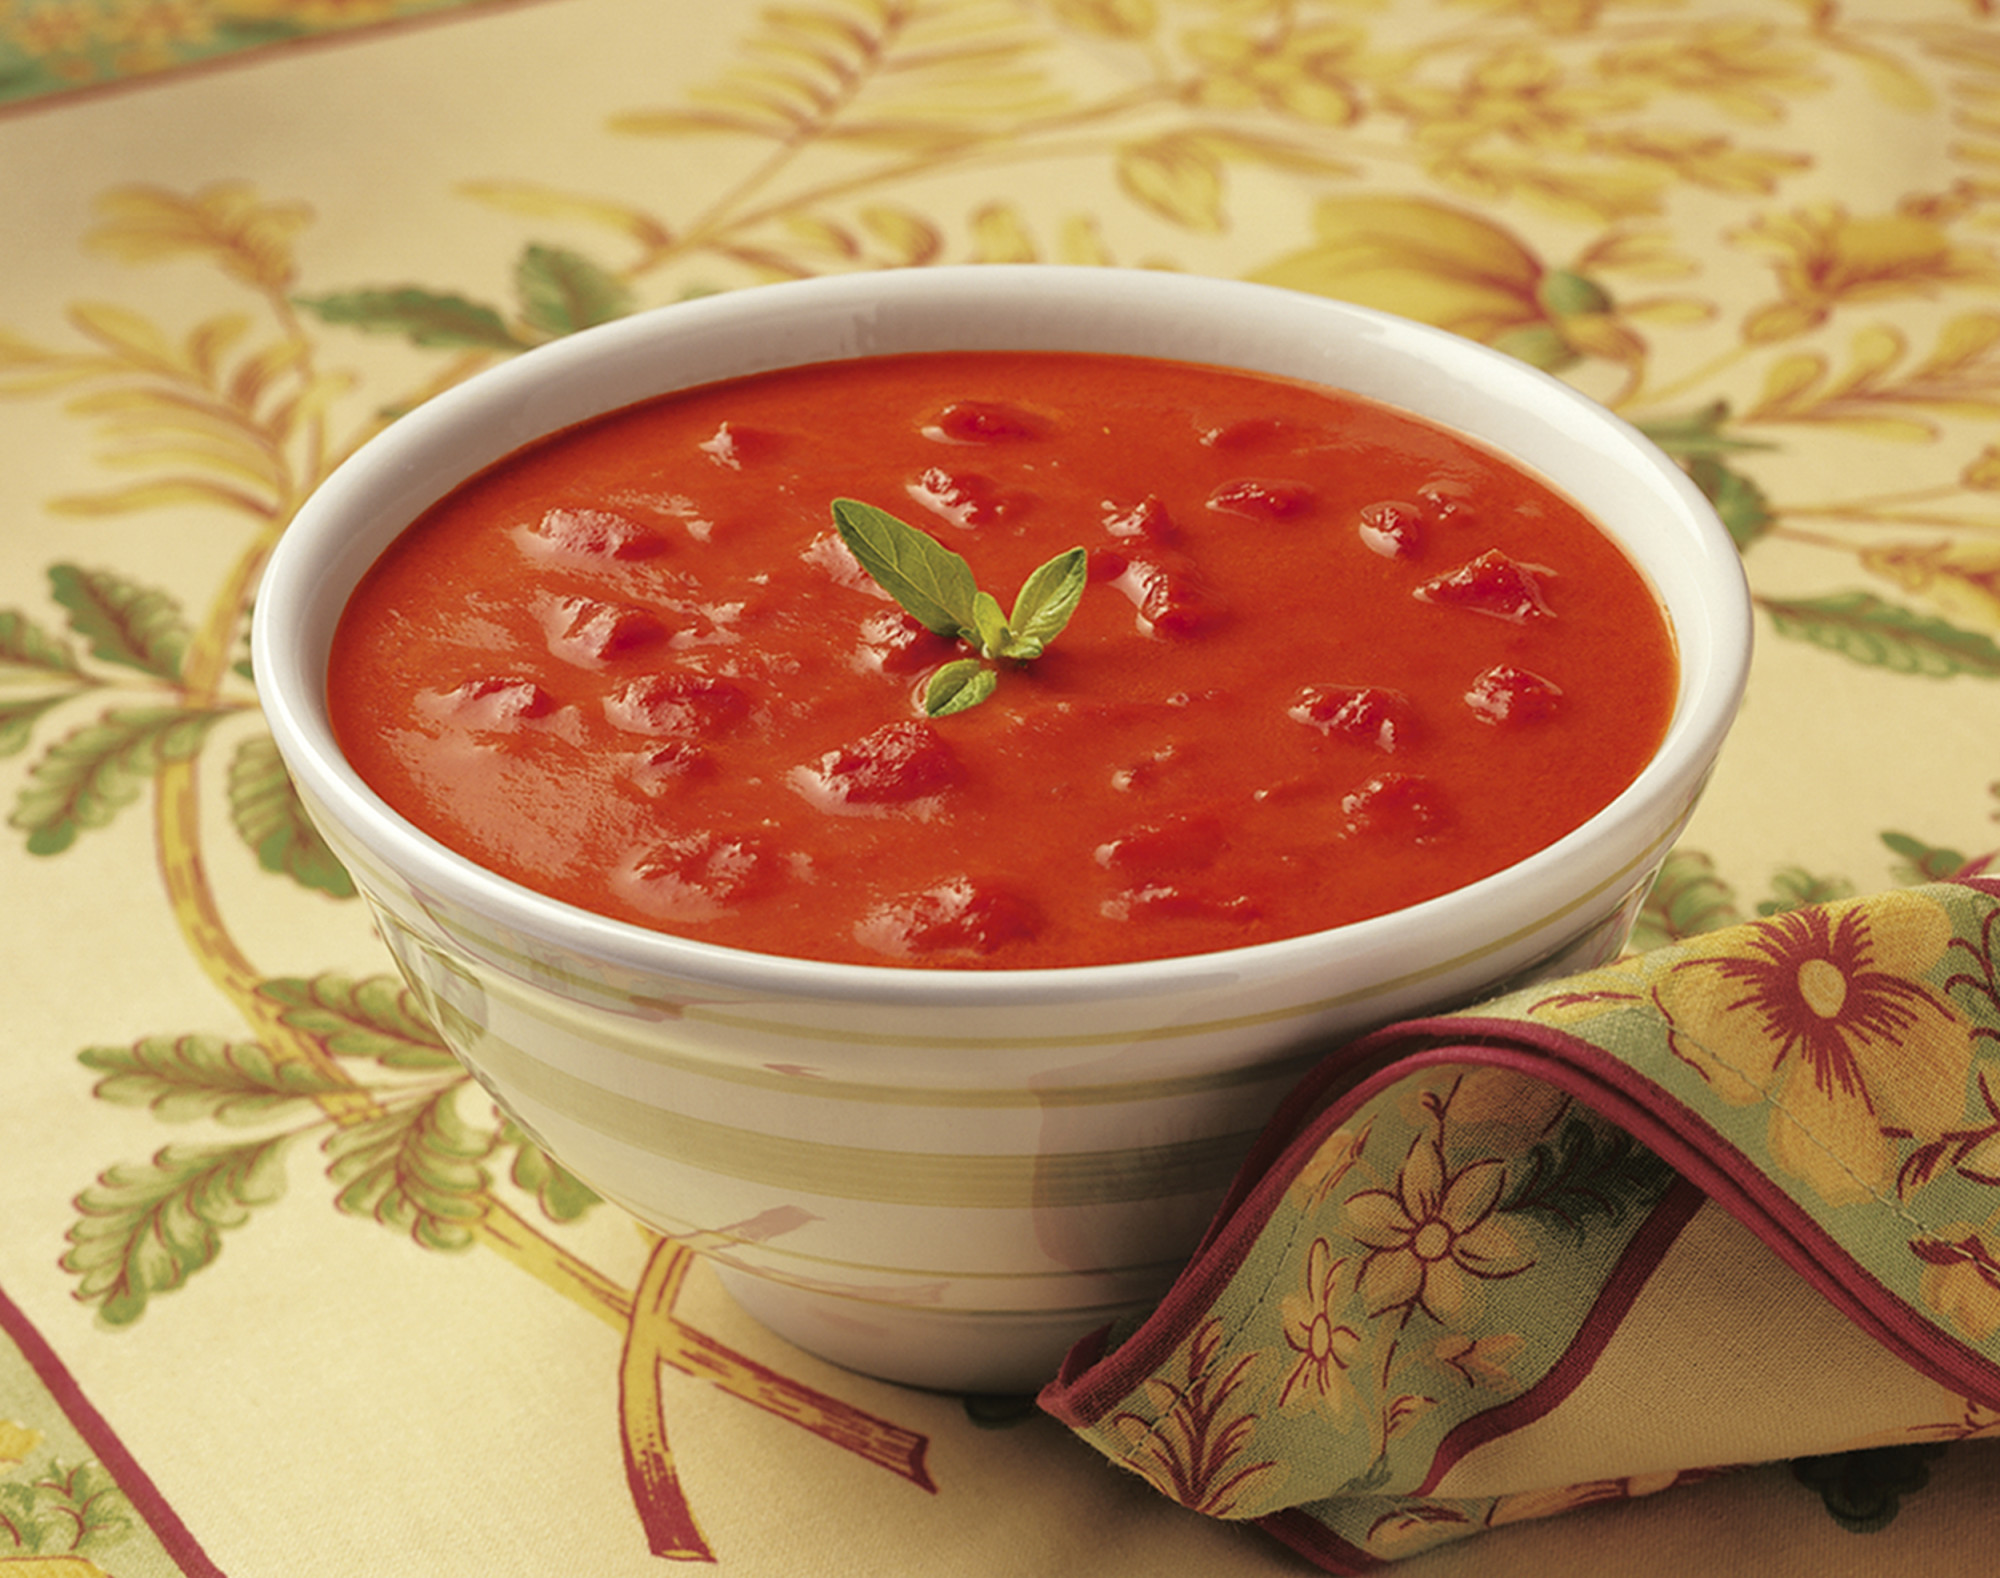 Amy’s Kitchen Soup, Organic Chunky Tomato Bisque Soup, Gluten Free, Canned Soup, 14.5 oz - image 3 of 8